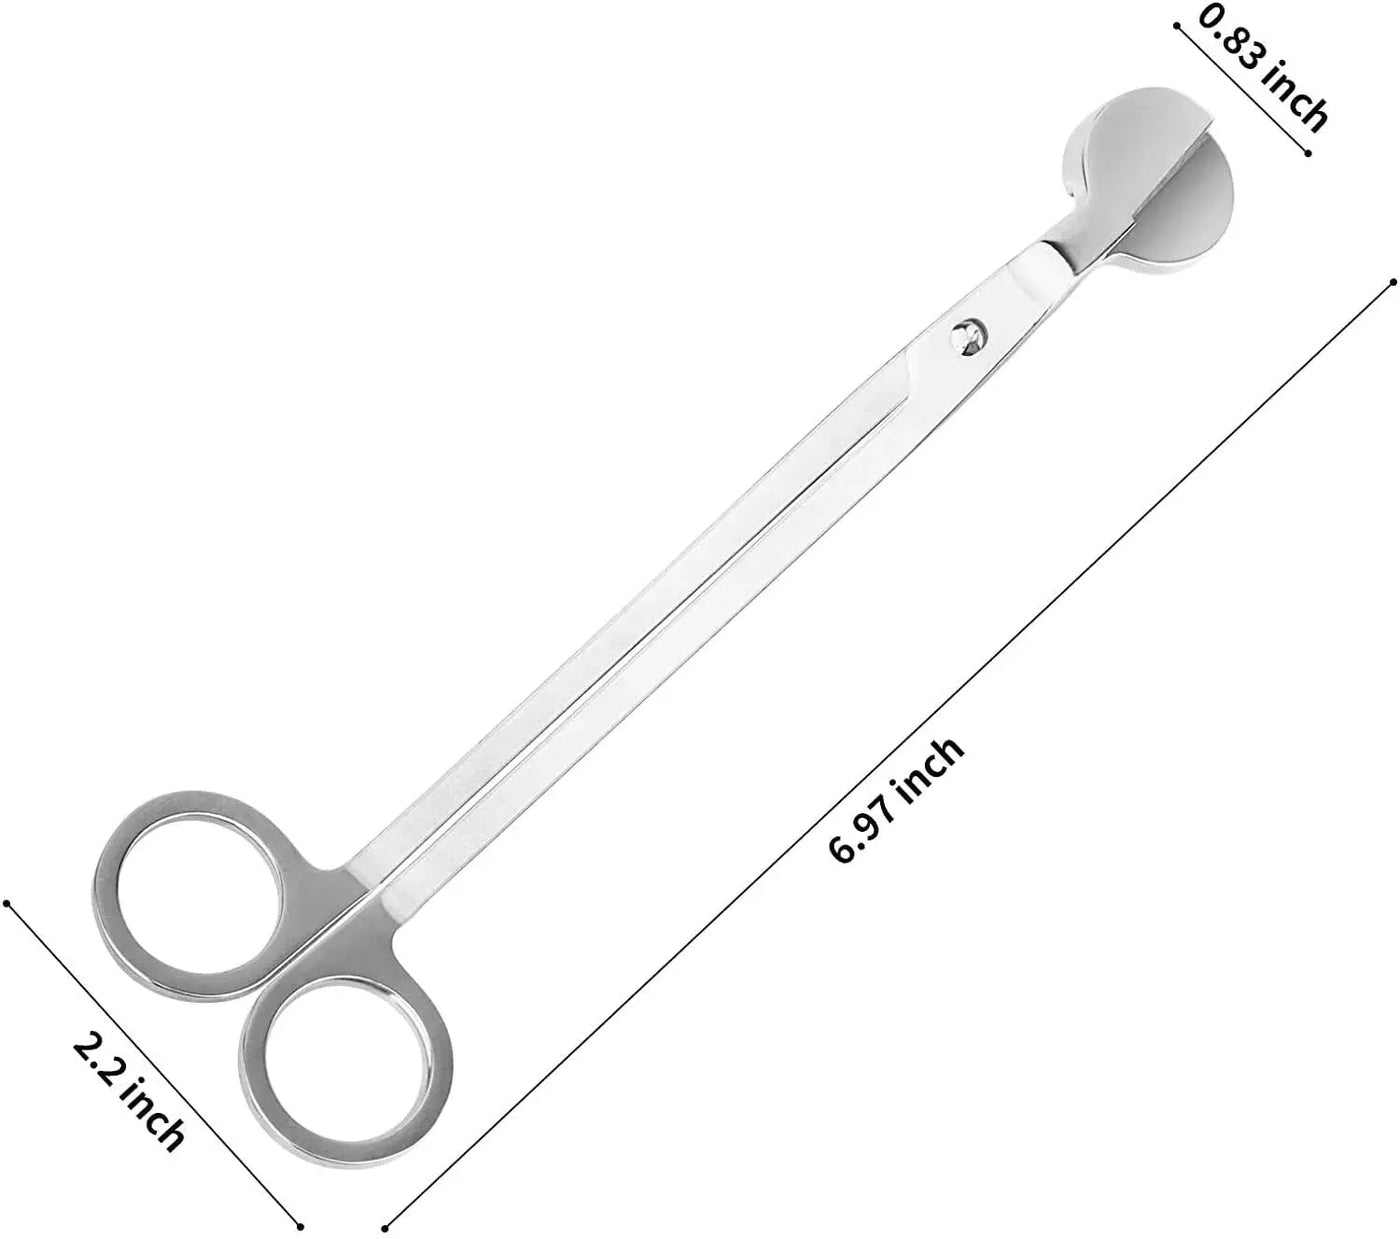 Stainless Steel Candle Wick Trimmer | Candle Wick Cutter for Candle Lover, Candle Care Kit | Rust - Proof Candle Scissors, Must Haves Candle Accessories, Housewarming Gifts - 7 inch 76008 Candle Co.